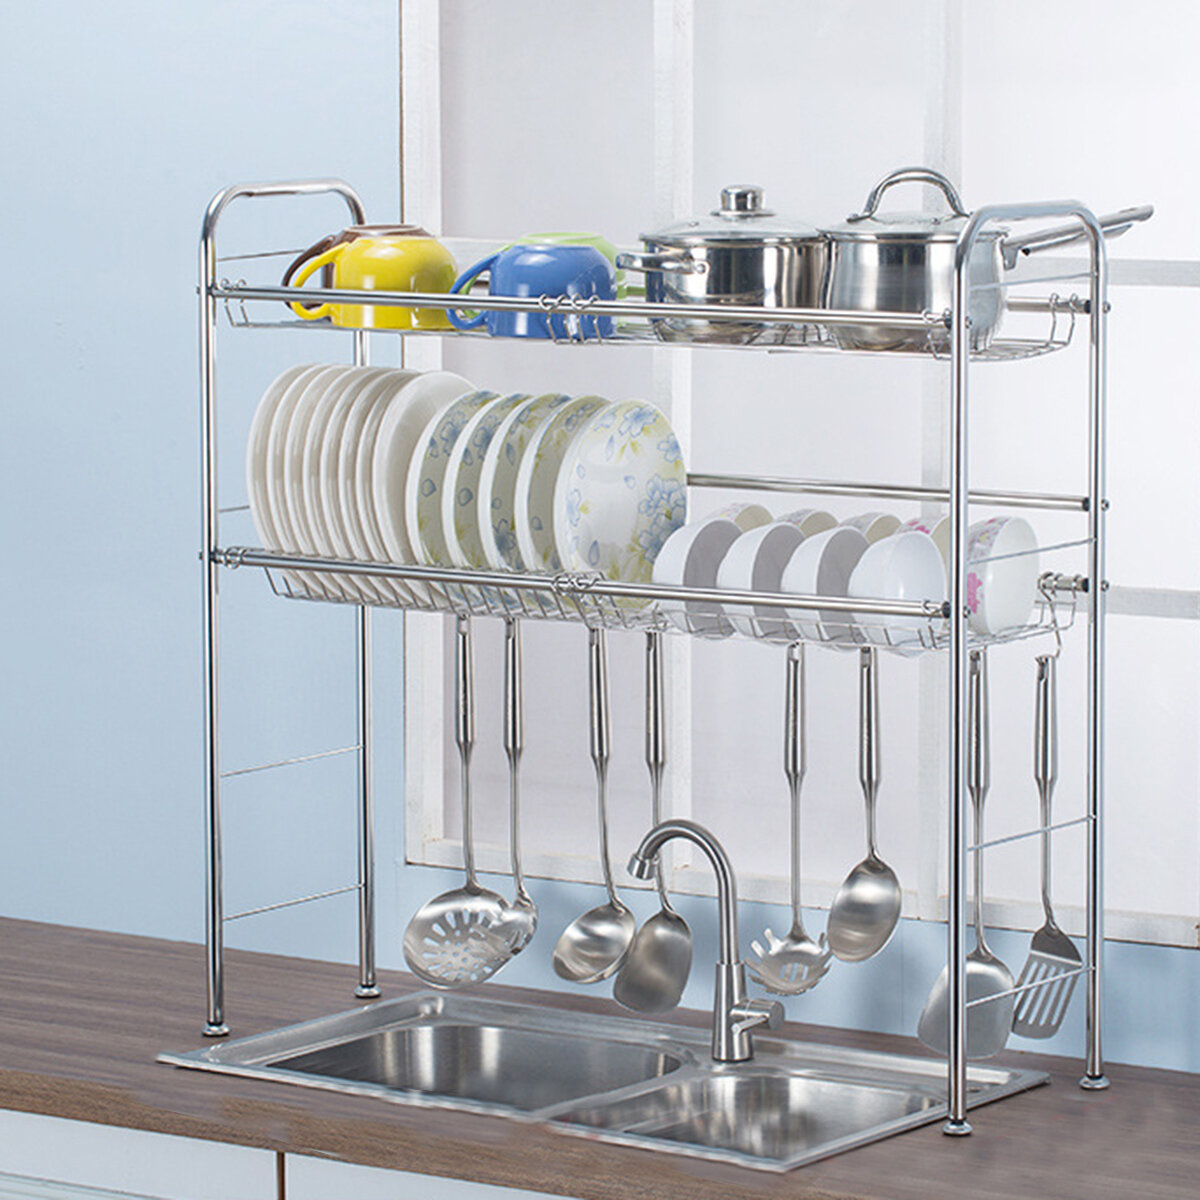 Image of 2 Tiers Stainless Steel Dishes Rack Dual Sink Drain Rack Adjustable Multi-use Kitchen Organizer Rack Dish Shelf Sink Dry